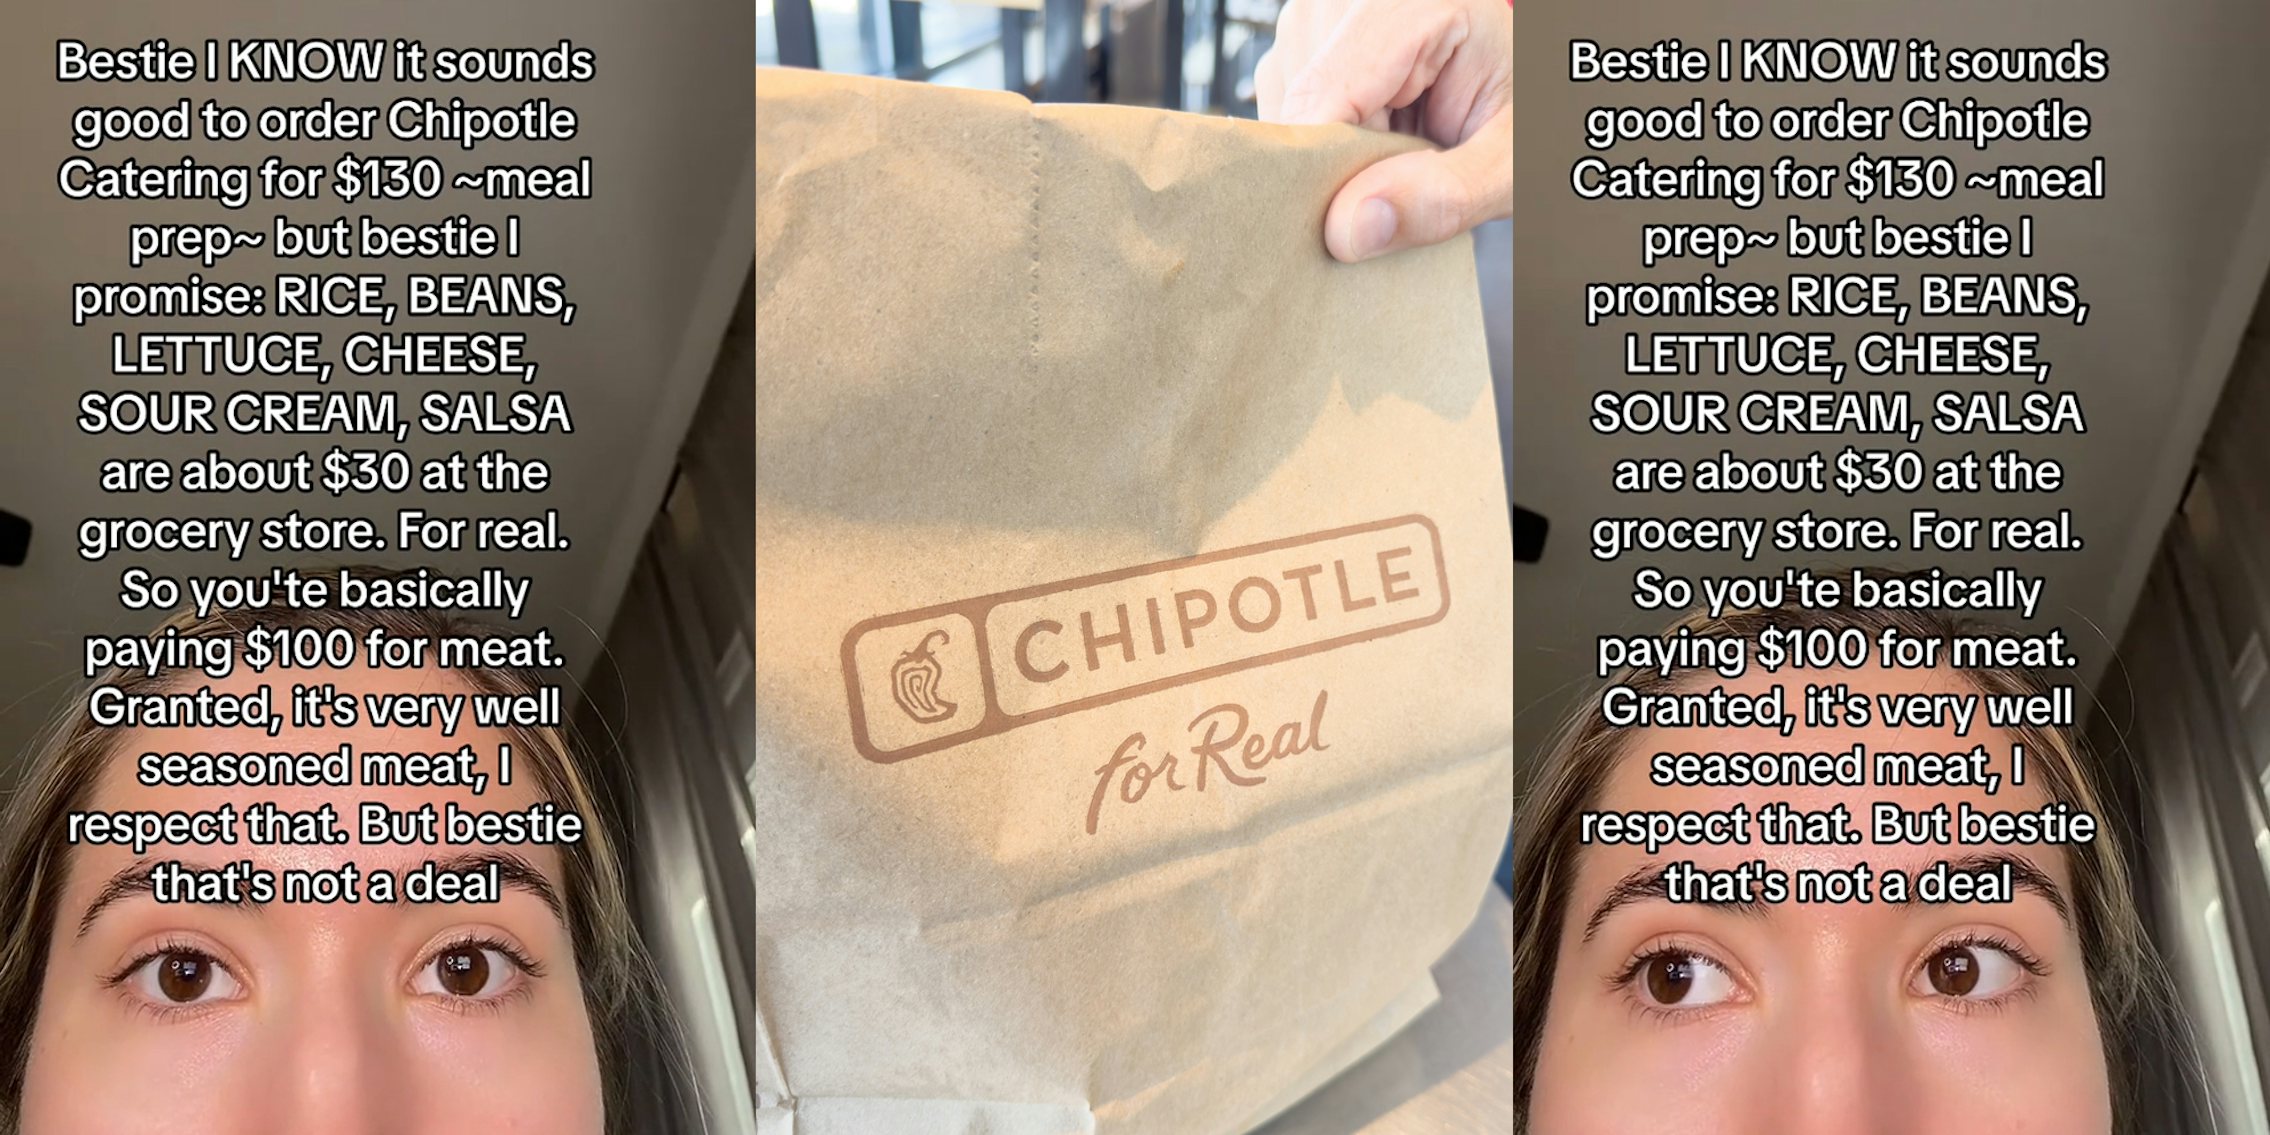 Chipotle customer with caption 'Bestie I KNOW it sounds good to order Chipotle Catering for $130-meal prep- but bestie I promise: RICE, BEANS, LETTUCE, CHEESE, SOUR CREAM, SALSA, are about $30 at the grocery store. For real. So you're basically paying $100 for meat. Granted, it's very well seasoned meat, I respect that. But bestie that's not a deal' (l) hand holding Chipotle branded bag of food (c) Chipotle customer with caption 'Bestie I KNOW it sounds good to order Chipotle Catering for $130-meal prep- but bestie I promise: RICE, BEANS, LETTUCE, CHEESE, SOUR CREAM, SALSA, are about $30 at the grocery store. For real. So you're basically paying $100 for meat. Granted, it's very well seasoned meat, I respect that. But bestie that's not a deal' (r)